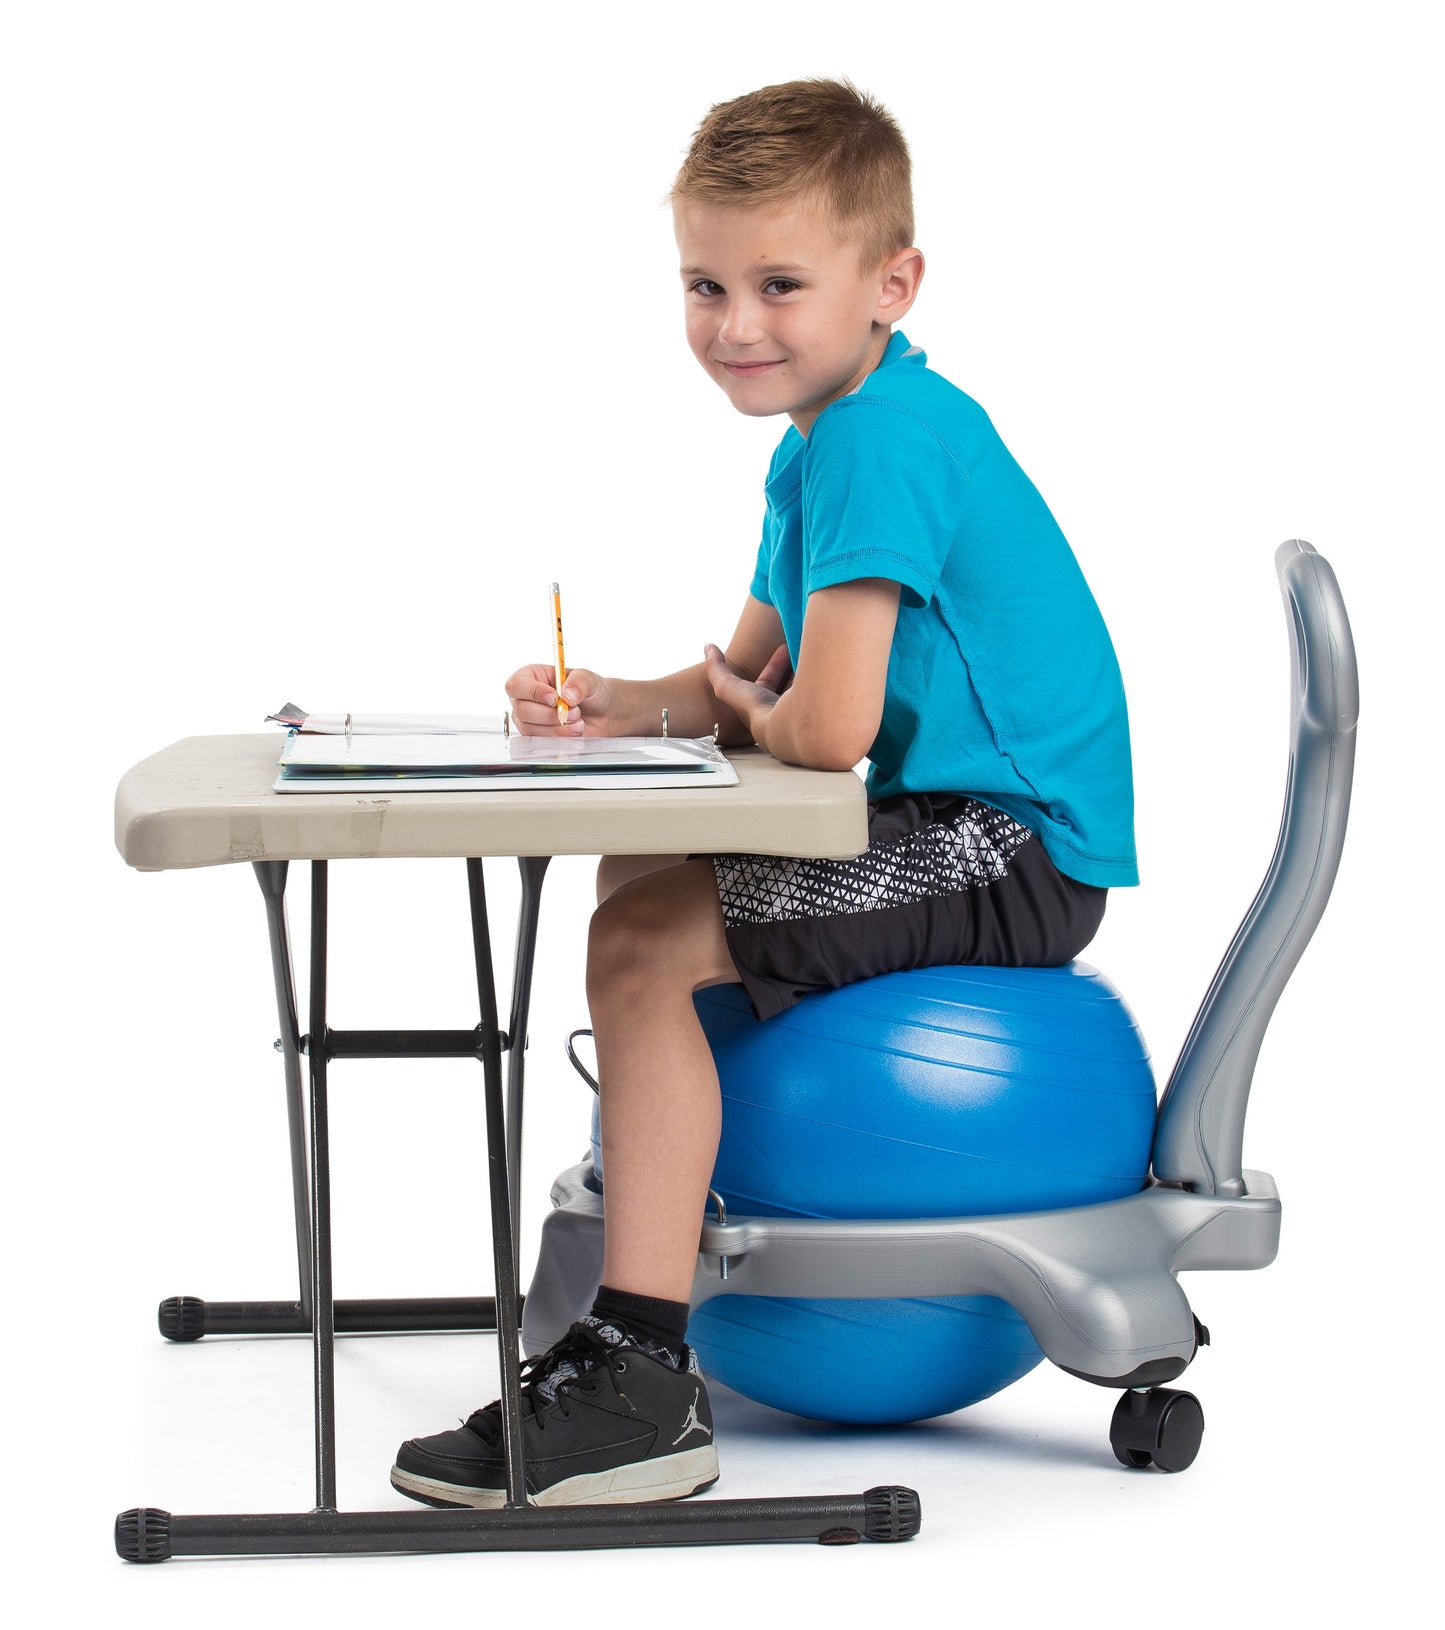 Stability Ball Chair - Keeps The Mind Focused While Promoting A Healthy Posture (Adult & Child)